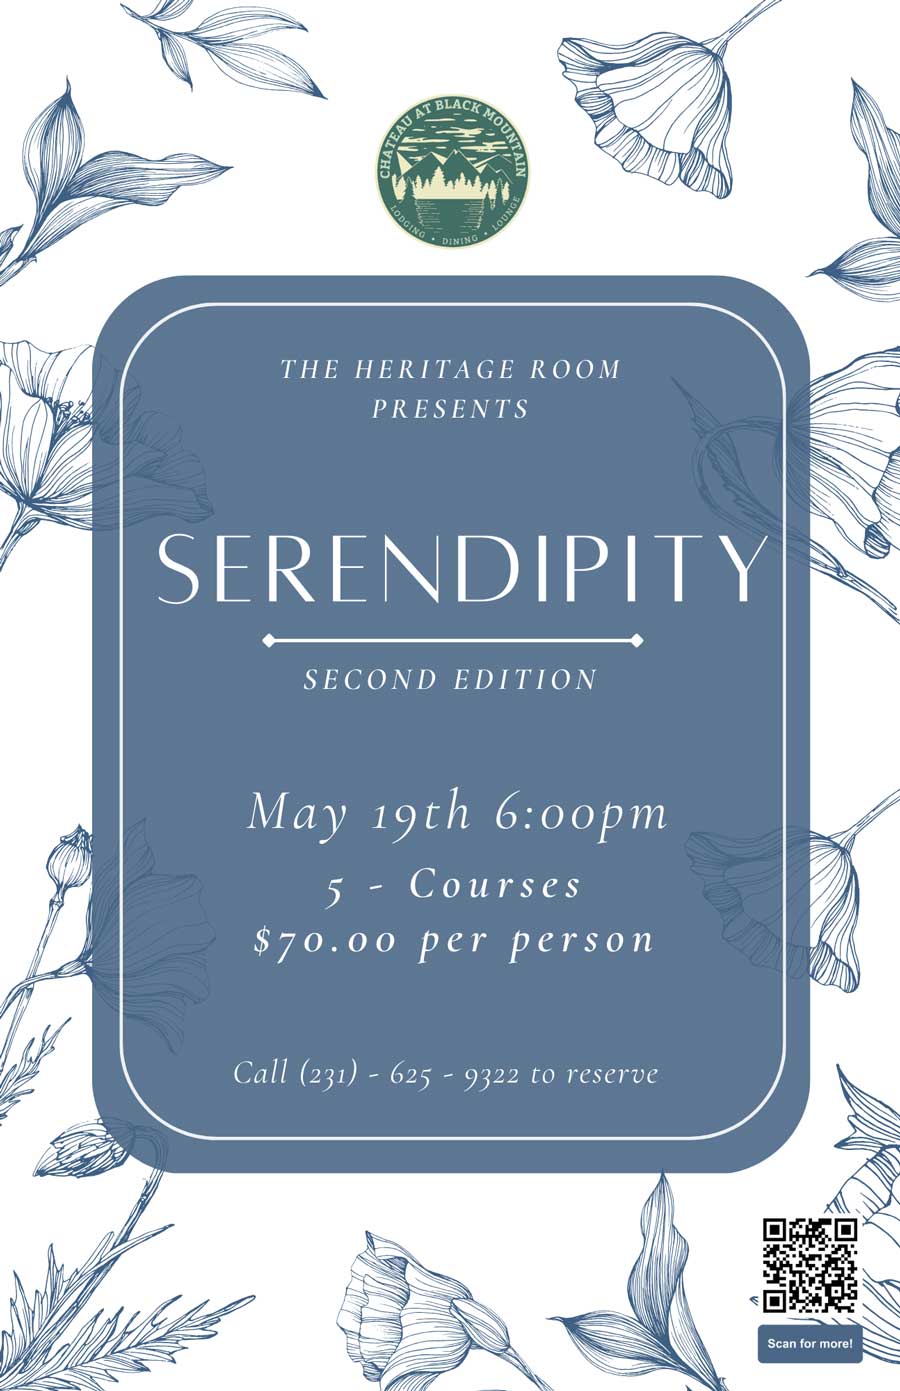 Serendipity Event at Chateau at Black Mountain's Heritage Room